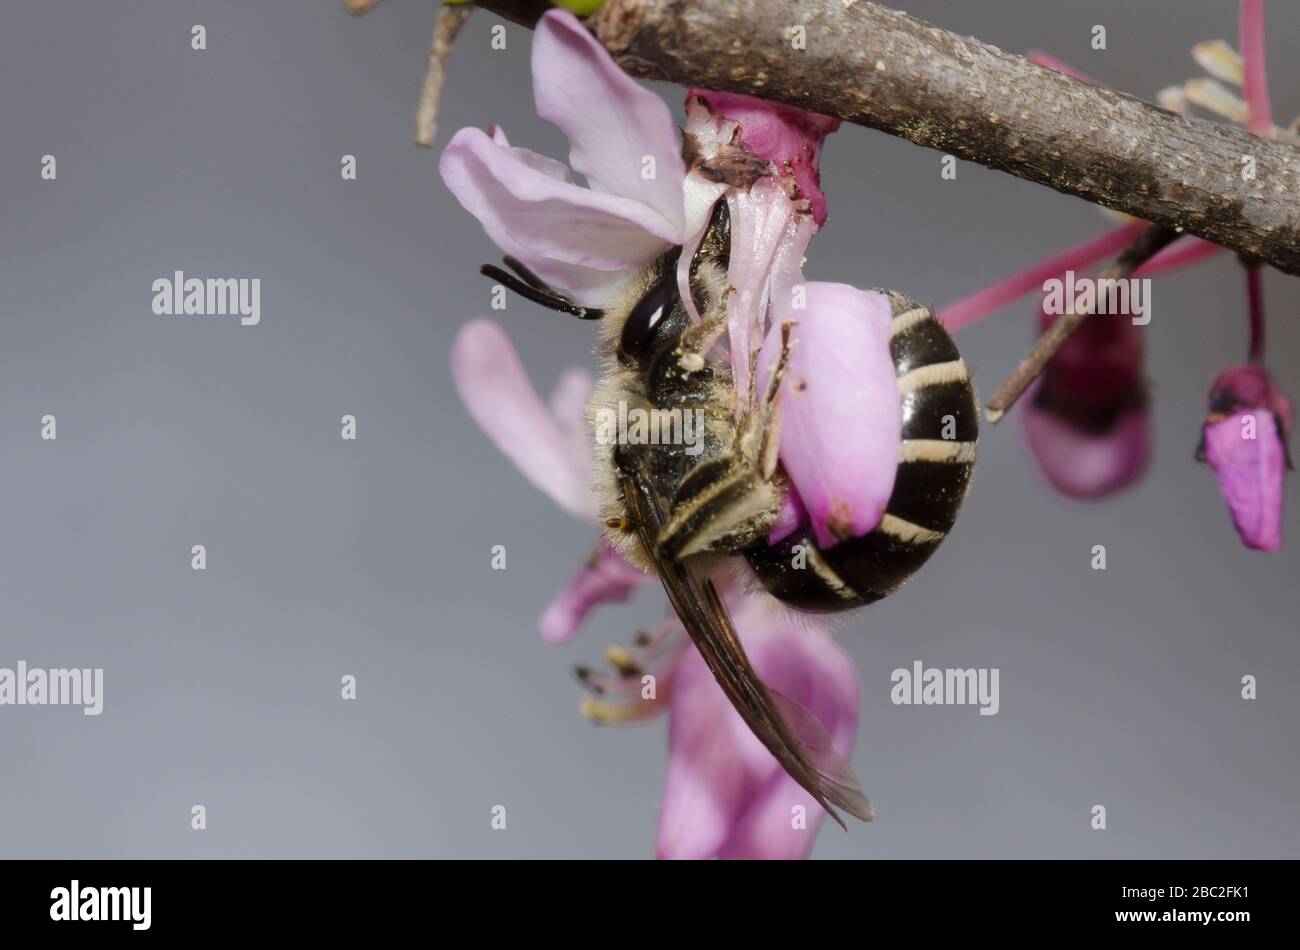 Unequal Cellophane Bee, Colletes inaequalis, foraging on Eastern Redbud, Cercis canadensis, blossoms Stock Photo